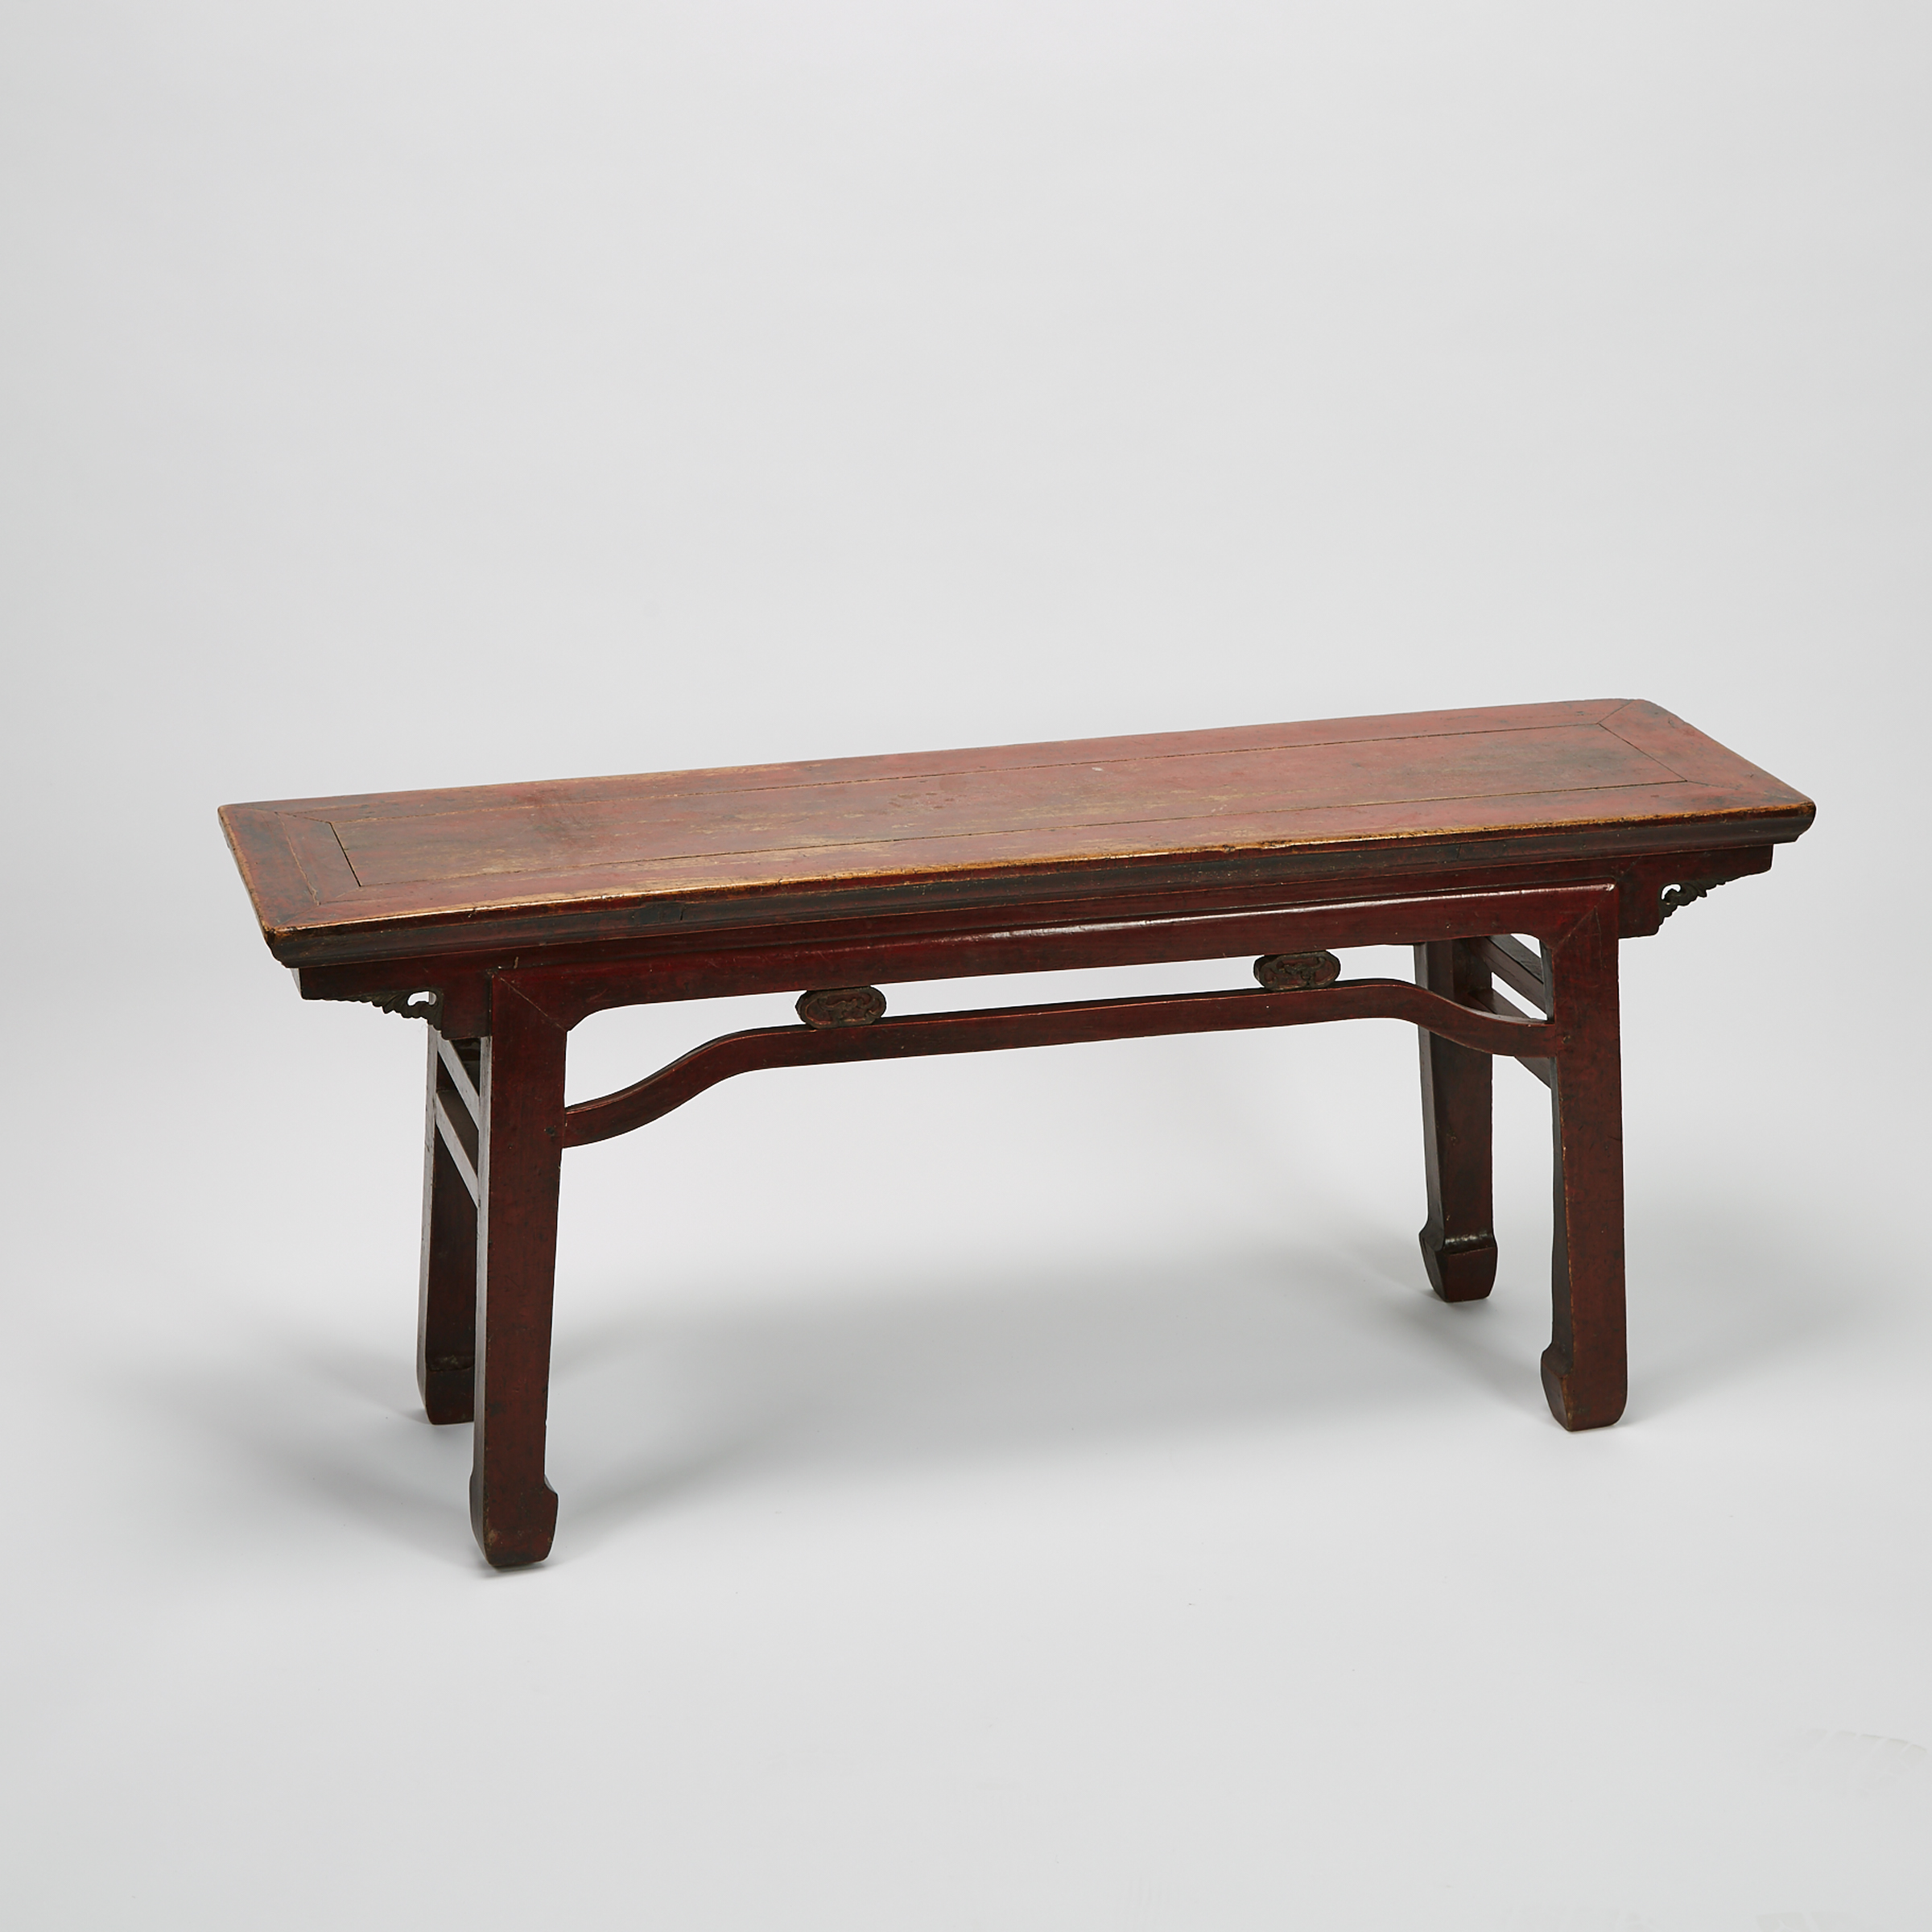 A Red Lacquer Low Table, 19th Century